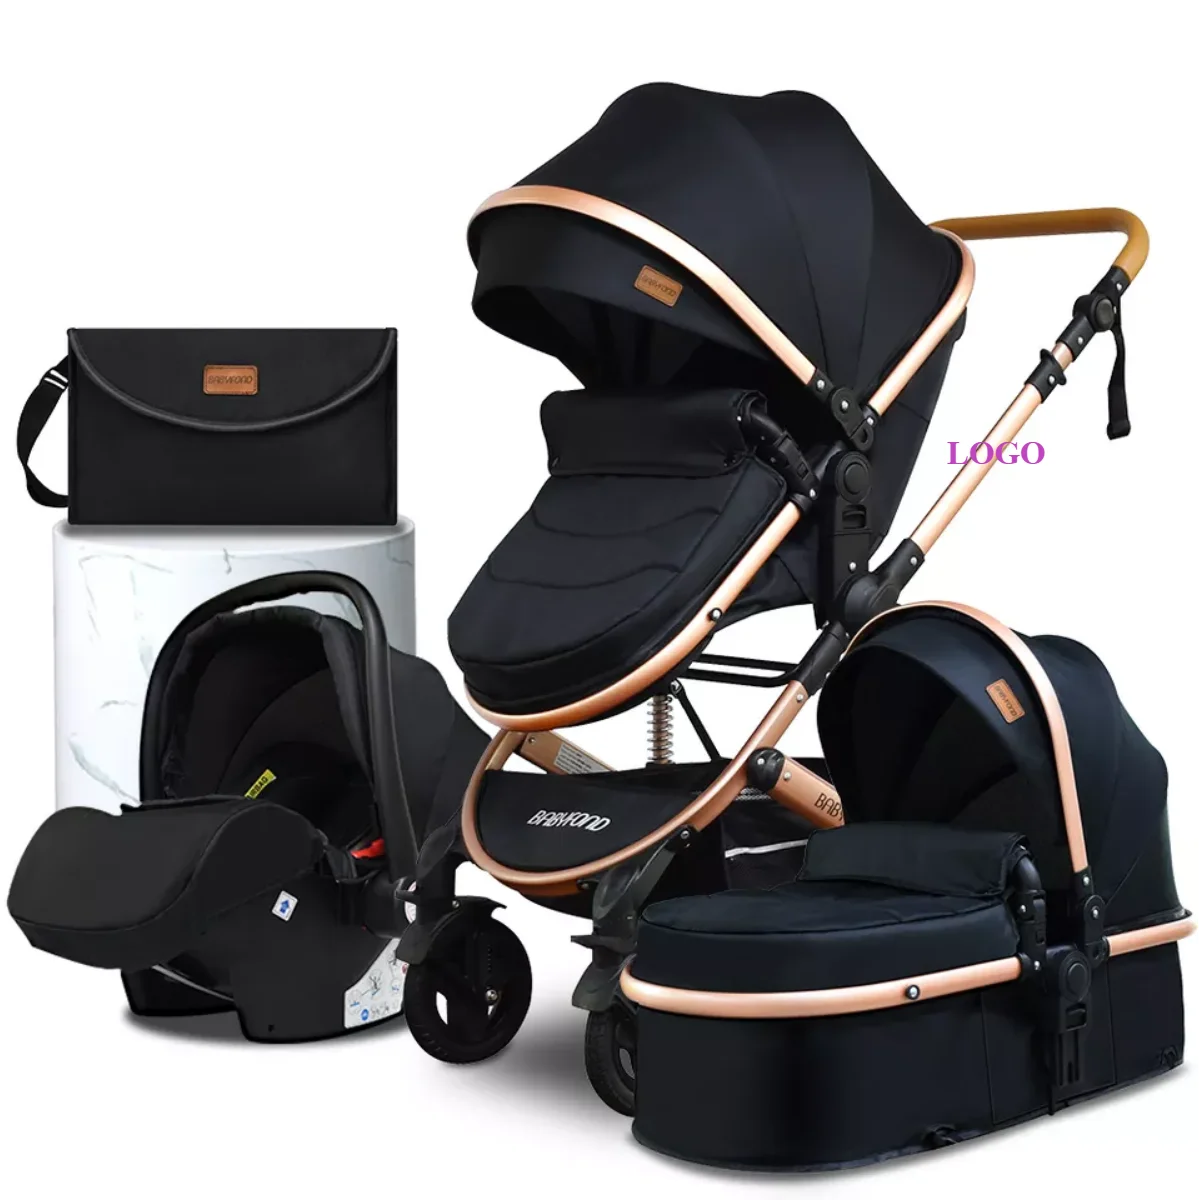 3 In 1 Baby Stroller With Car Seat 4 In 1 Folding Baby Pram For Kids Ride On Car Travel System